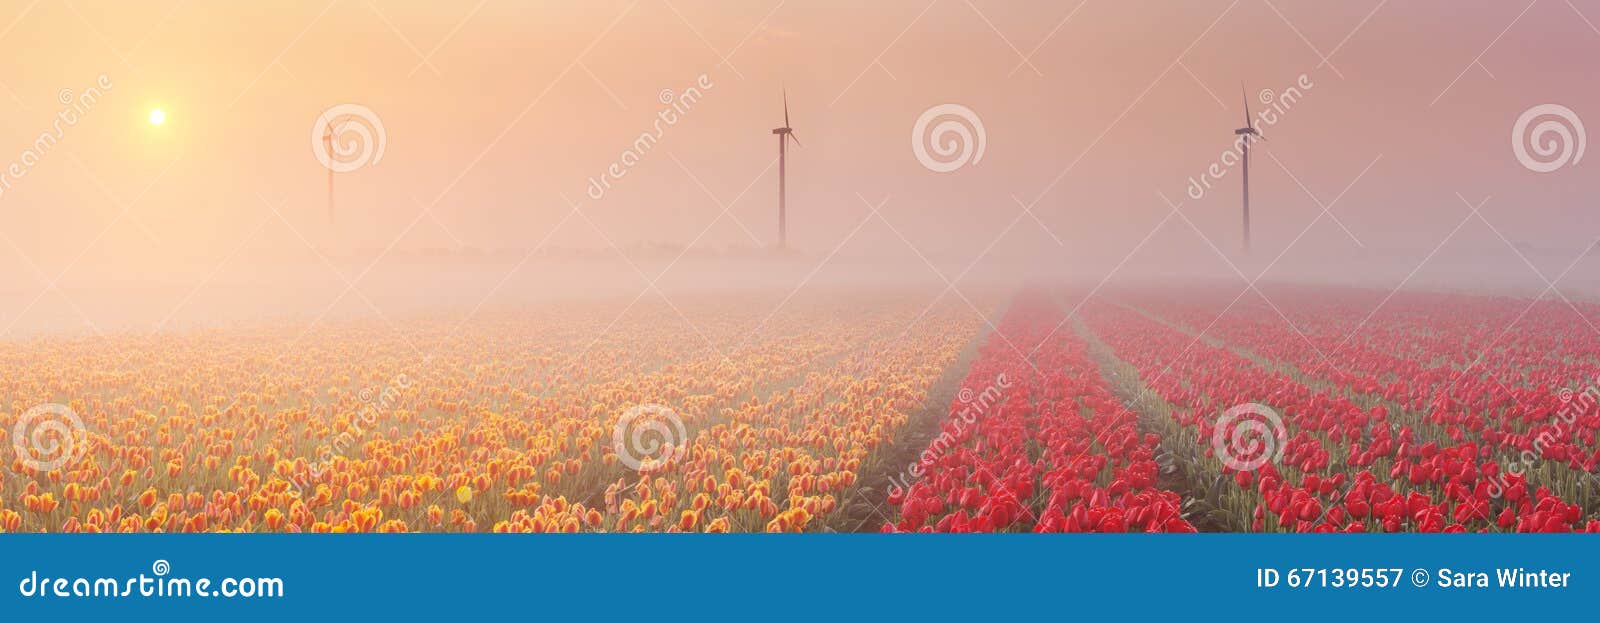 sunrise and fog over blooming tulips, the netherlands